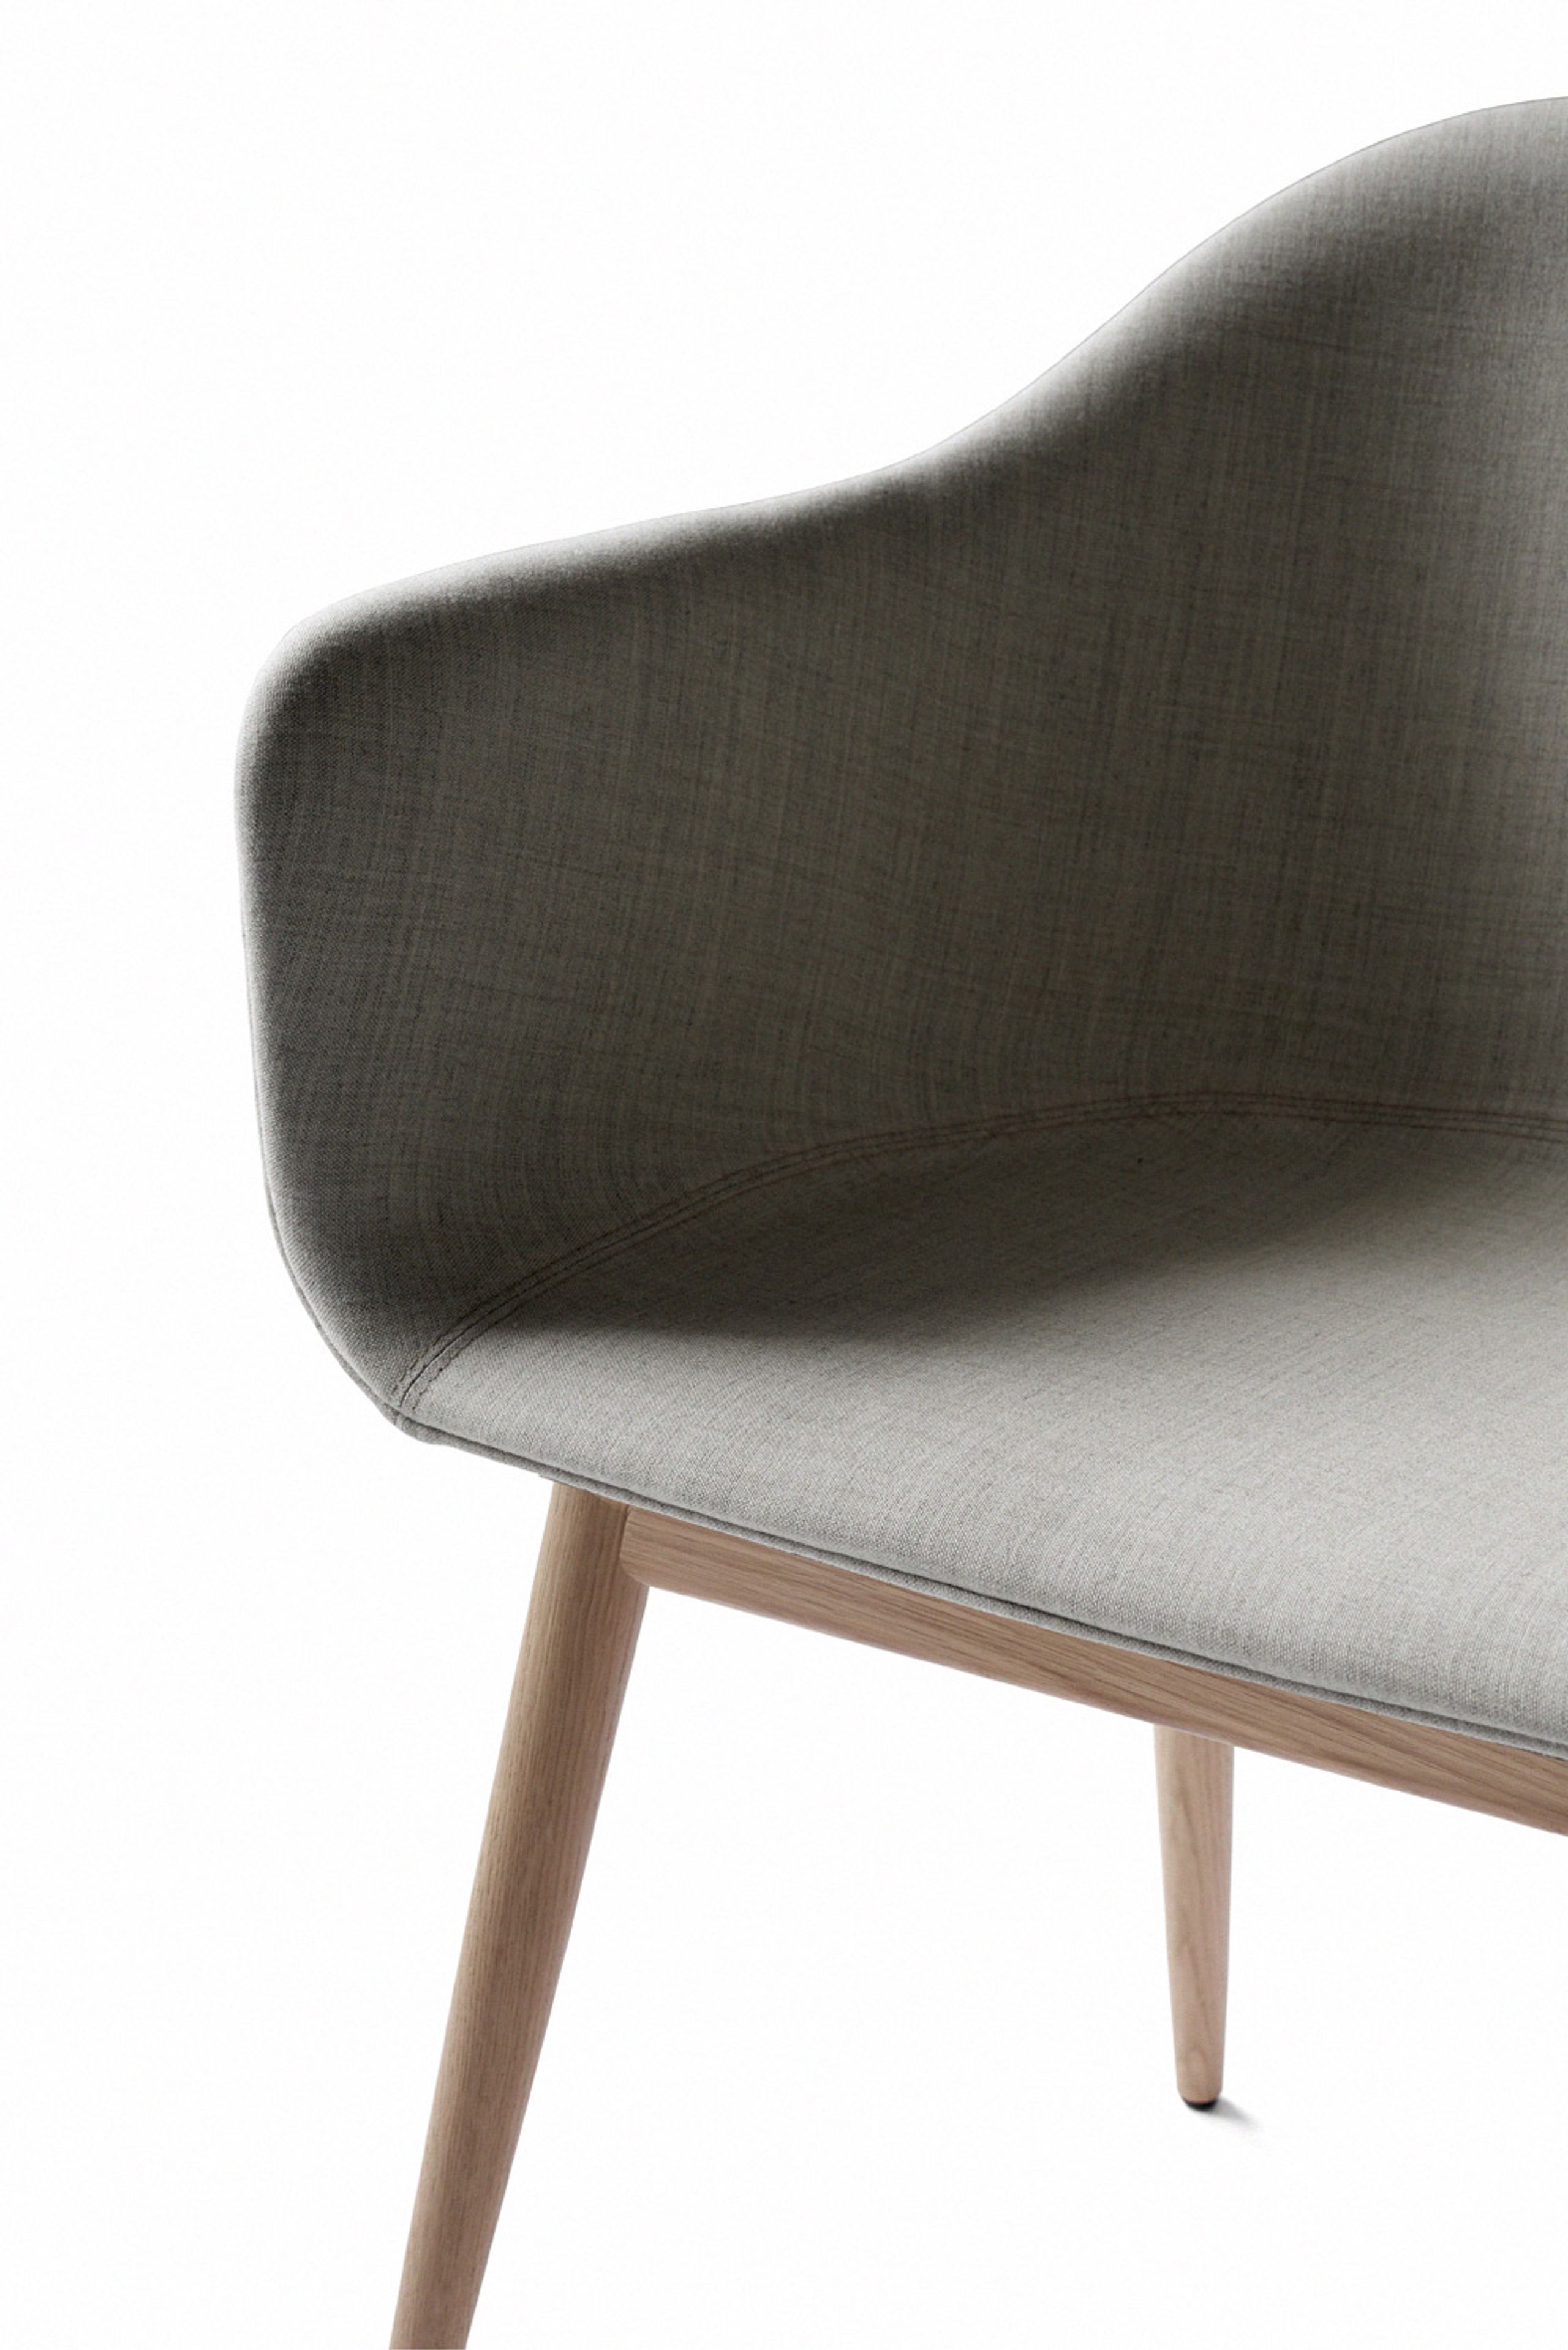 MENU - Chaise - Harbour Dining Chair / Natural Oak Base - Upholstery: Remix 233